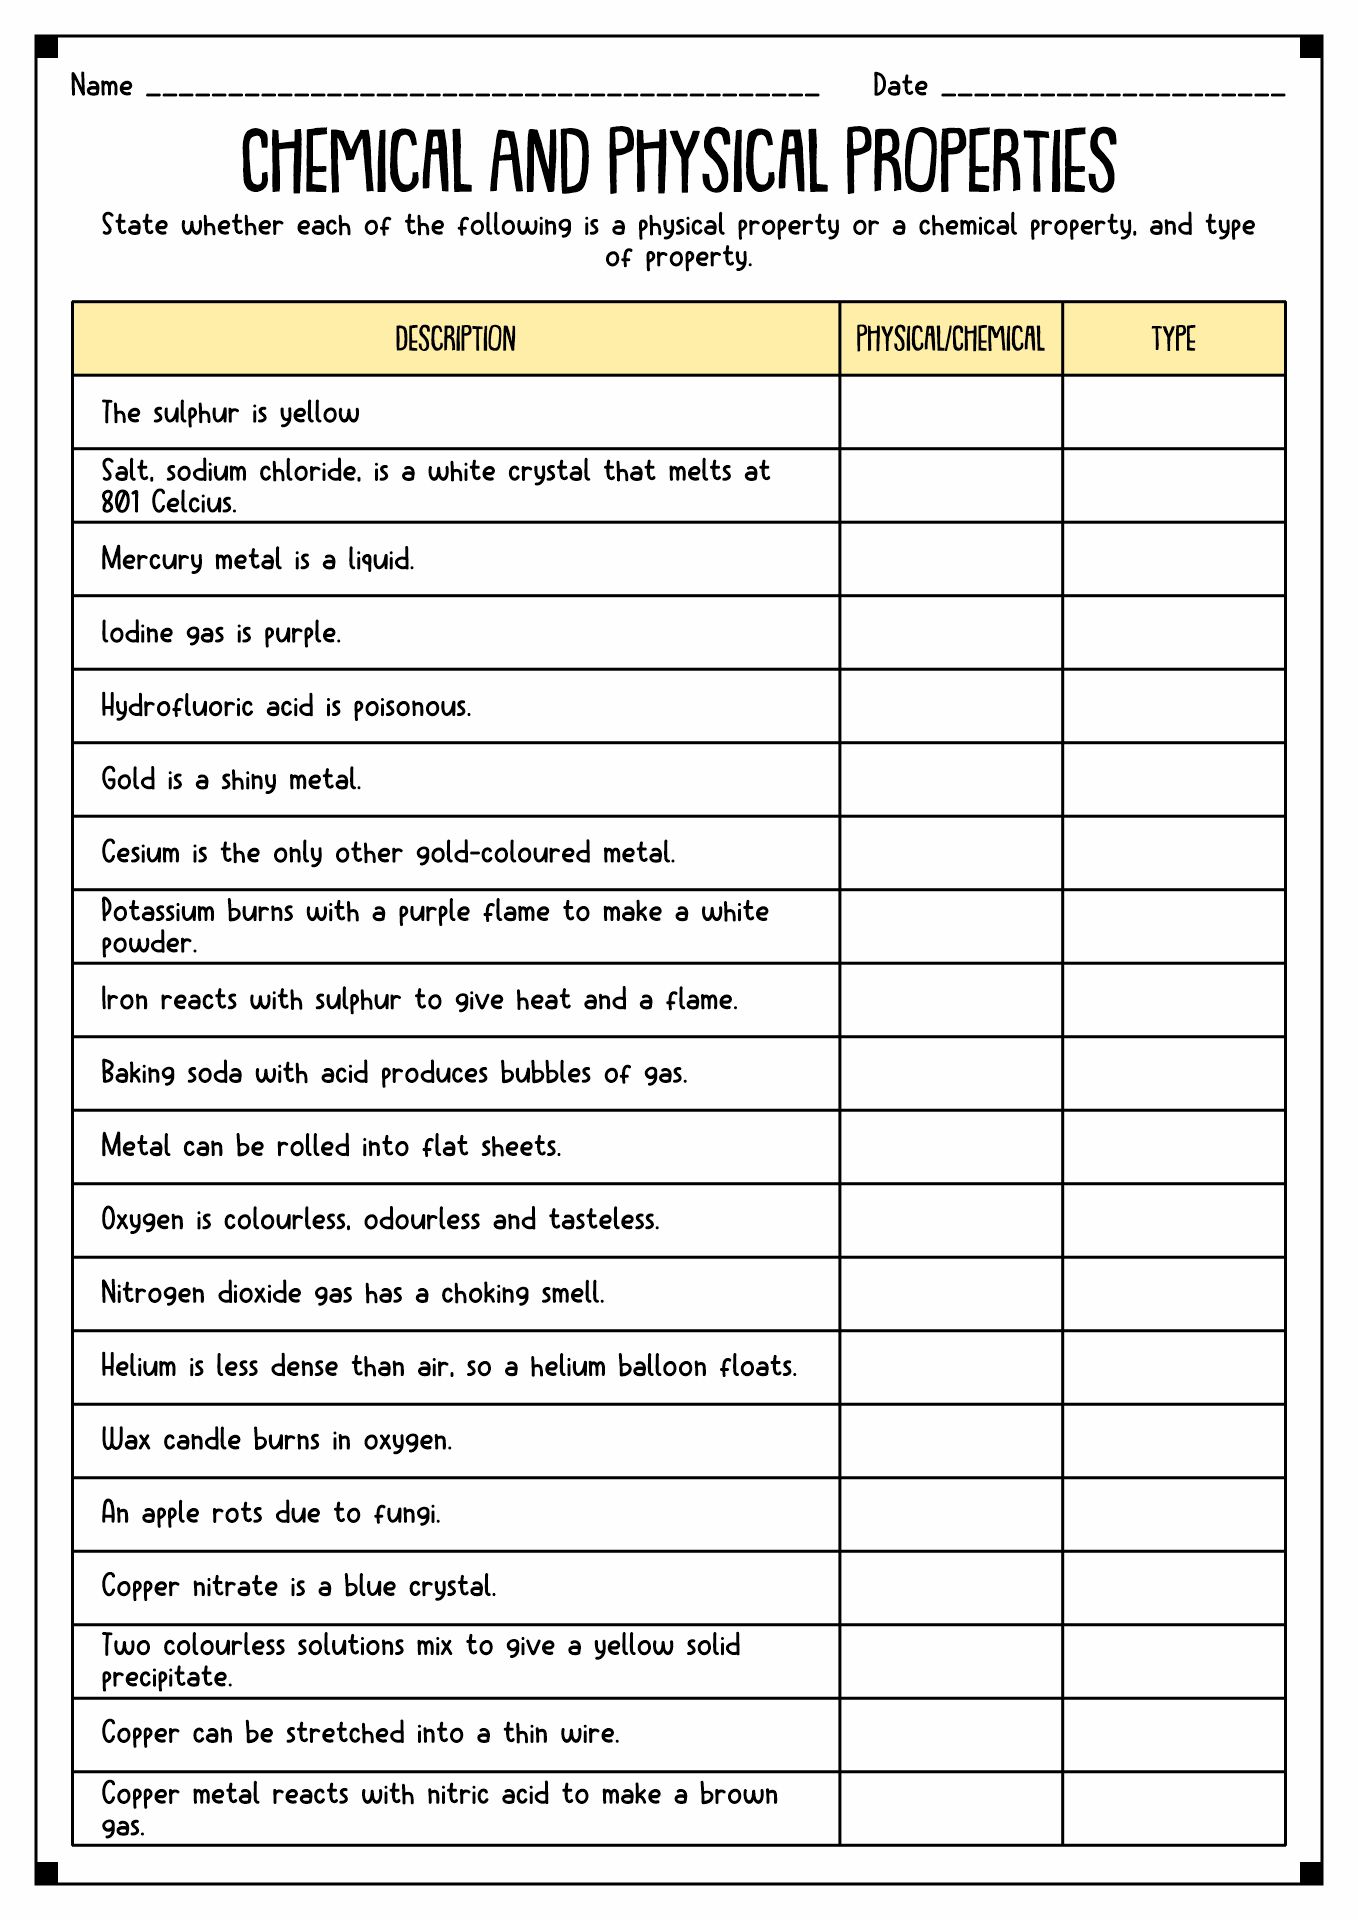 14-best-images-of-physical-changes-matter-worksheets-matter-physical